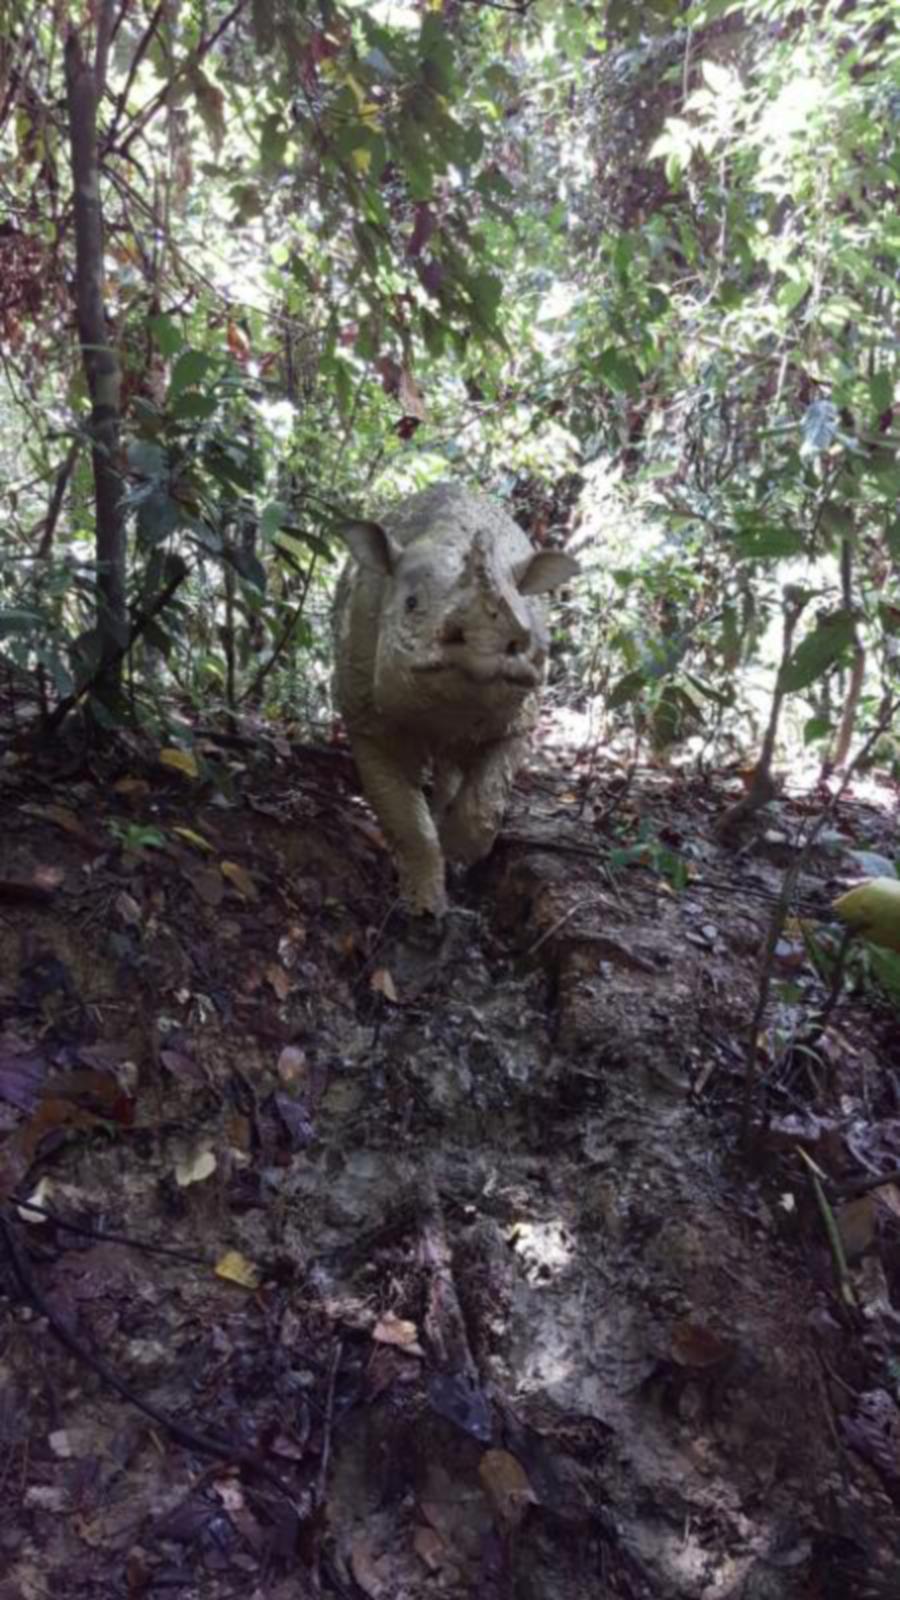 Puntung, one of only three Sumatran rhinos left in Malaysia, condition reportedly showed signs of improvement over the weekend. Pictures courtesy of Sabah Wildlife 